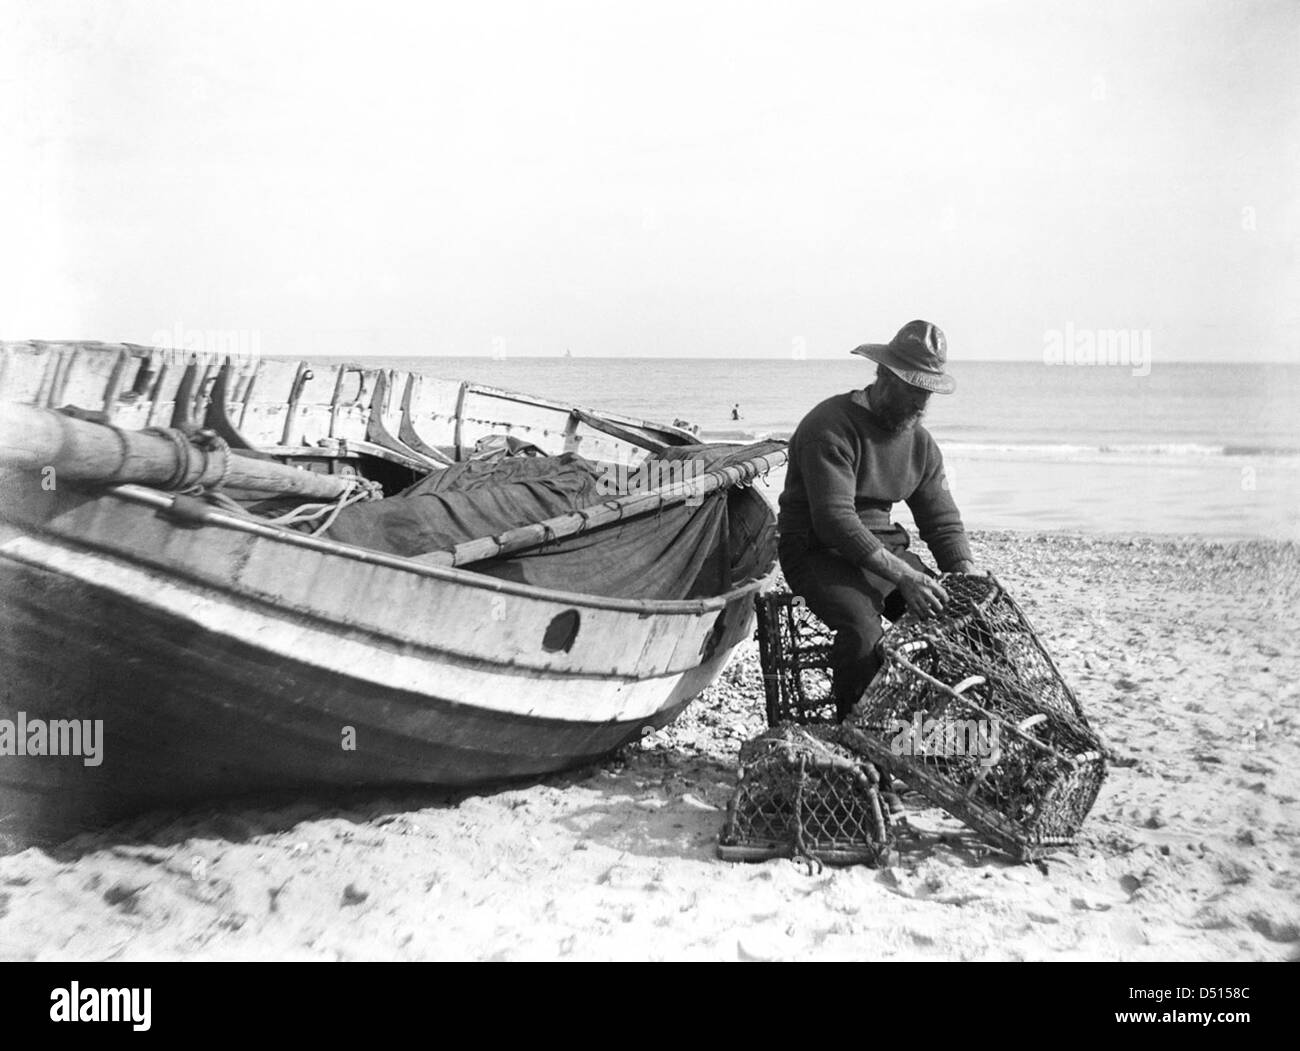 A fisherman in sou'wester mending lobster/crab creels on the beach alongside a beached Sheringham crab boat. Stock Photo